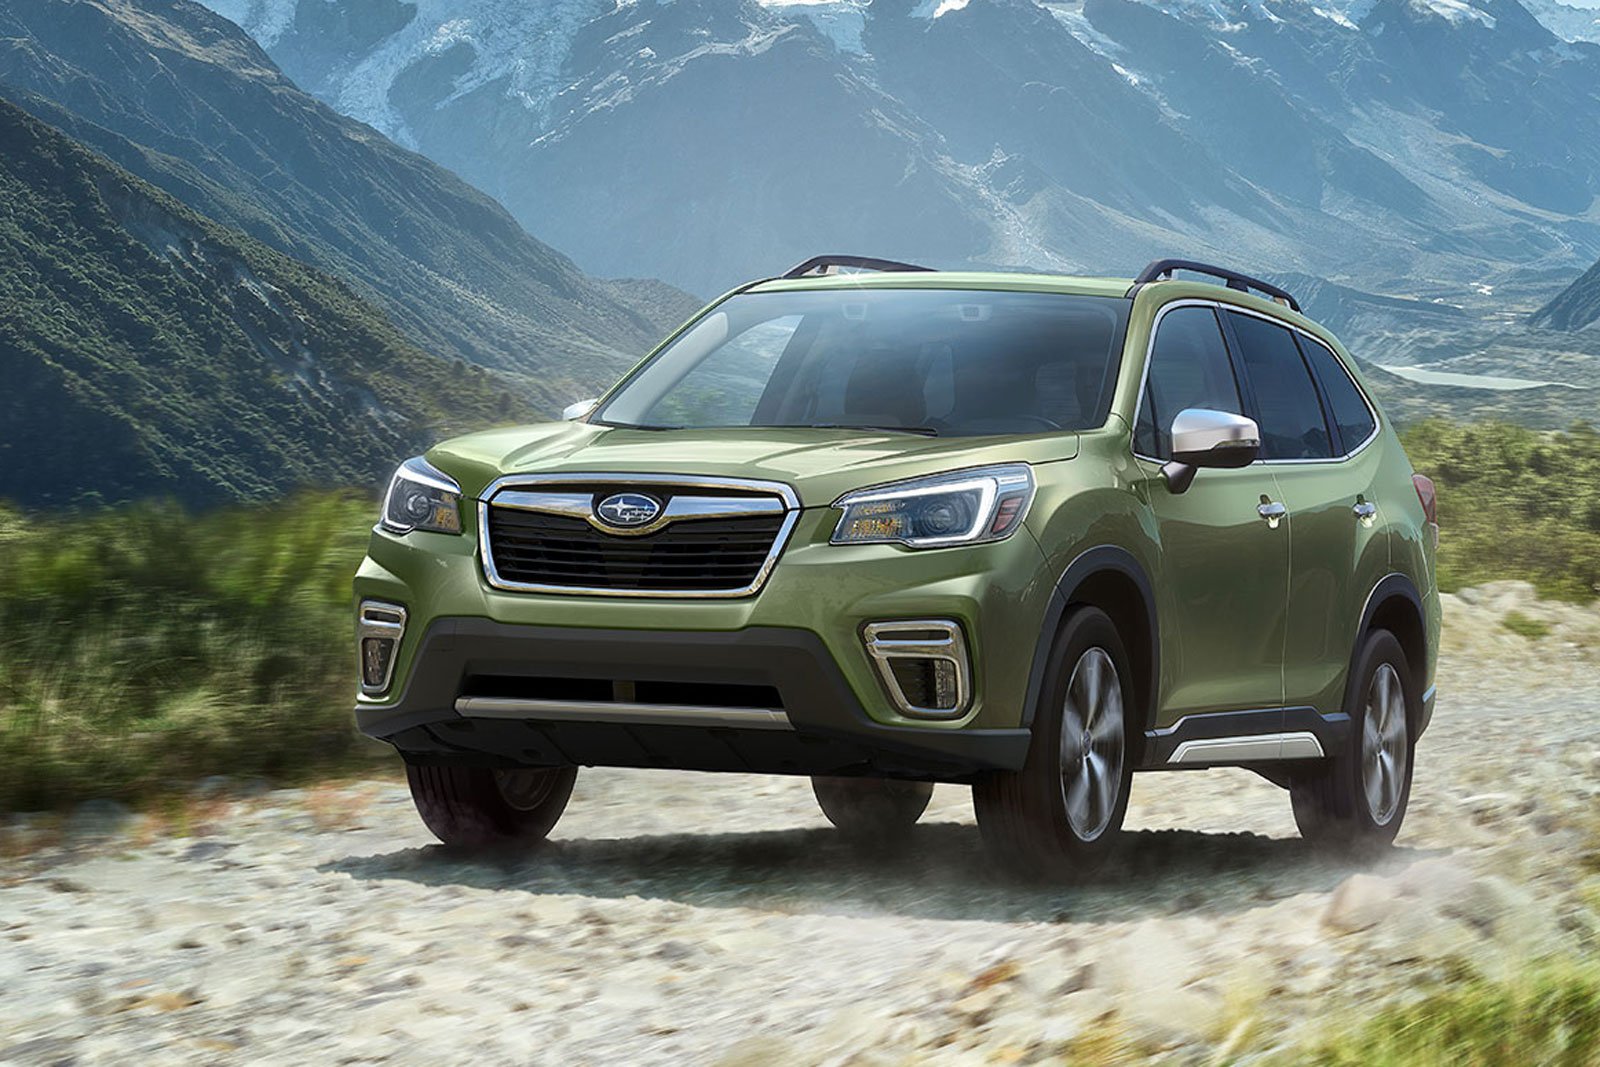 2021 Subaru Forester At A Glance - Motor Illustrated